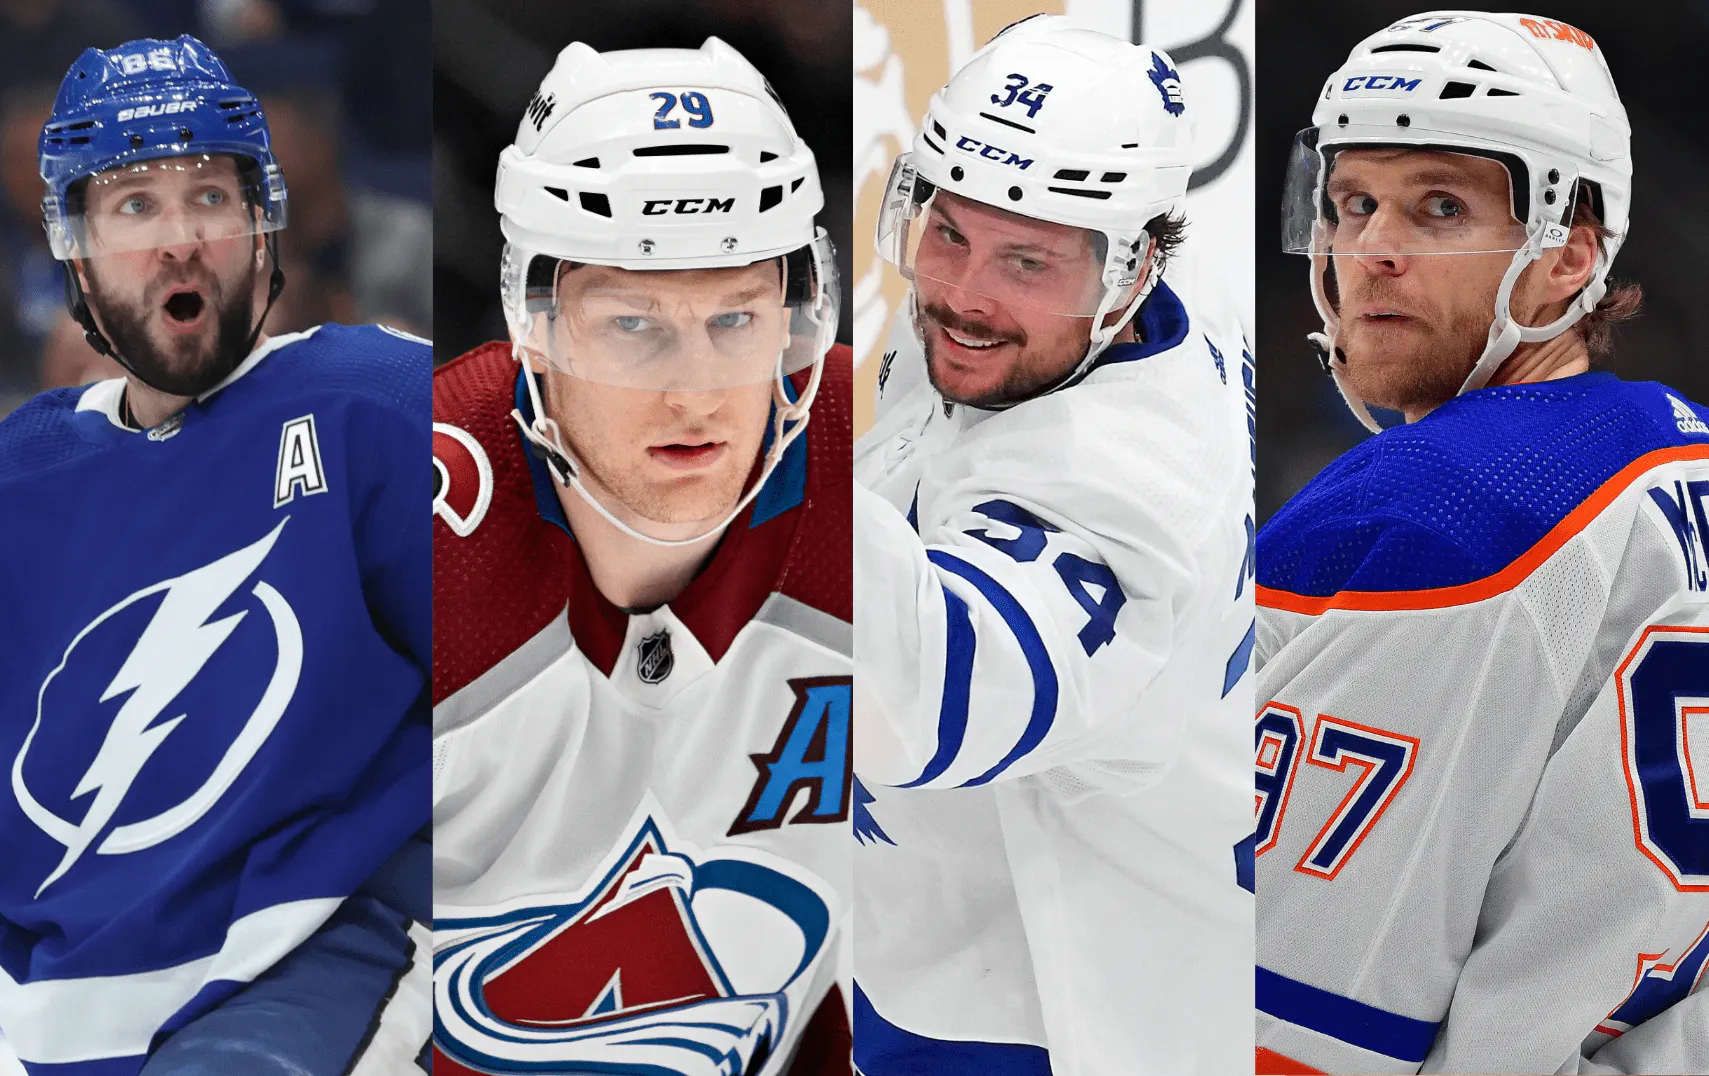 Have Four Forwards Ever Dominated an NHL Season Like This Before?